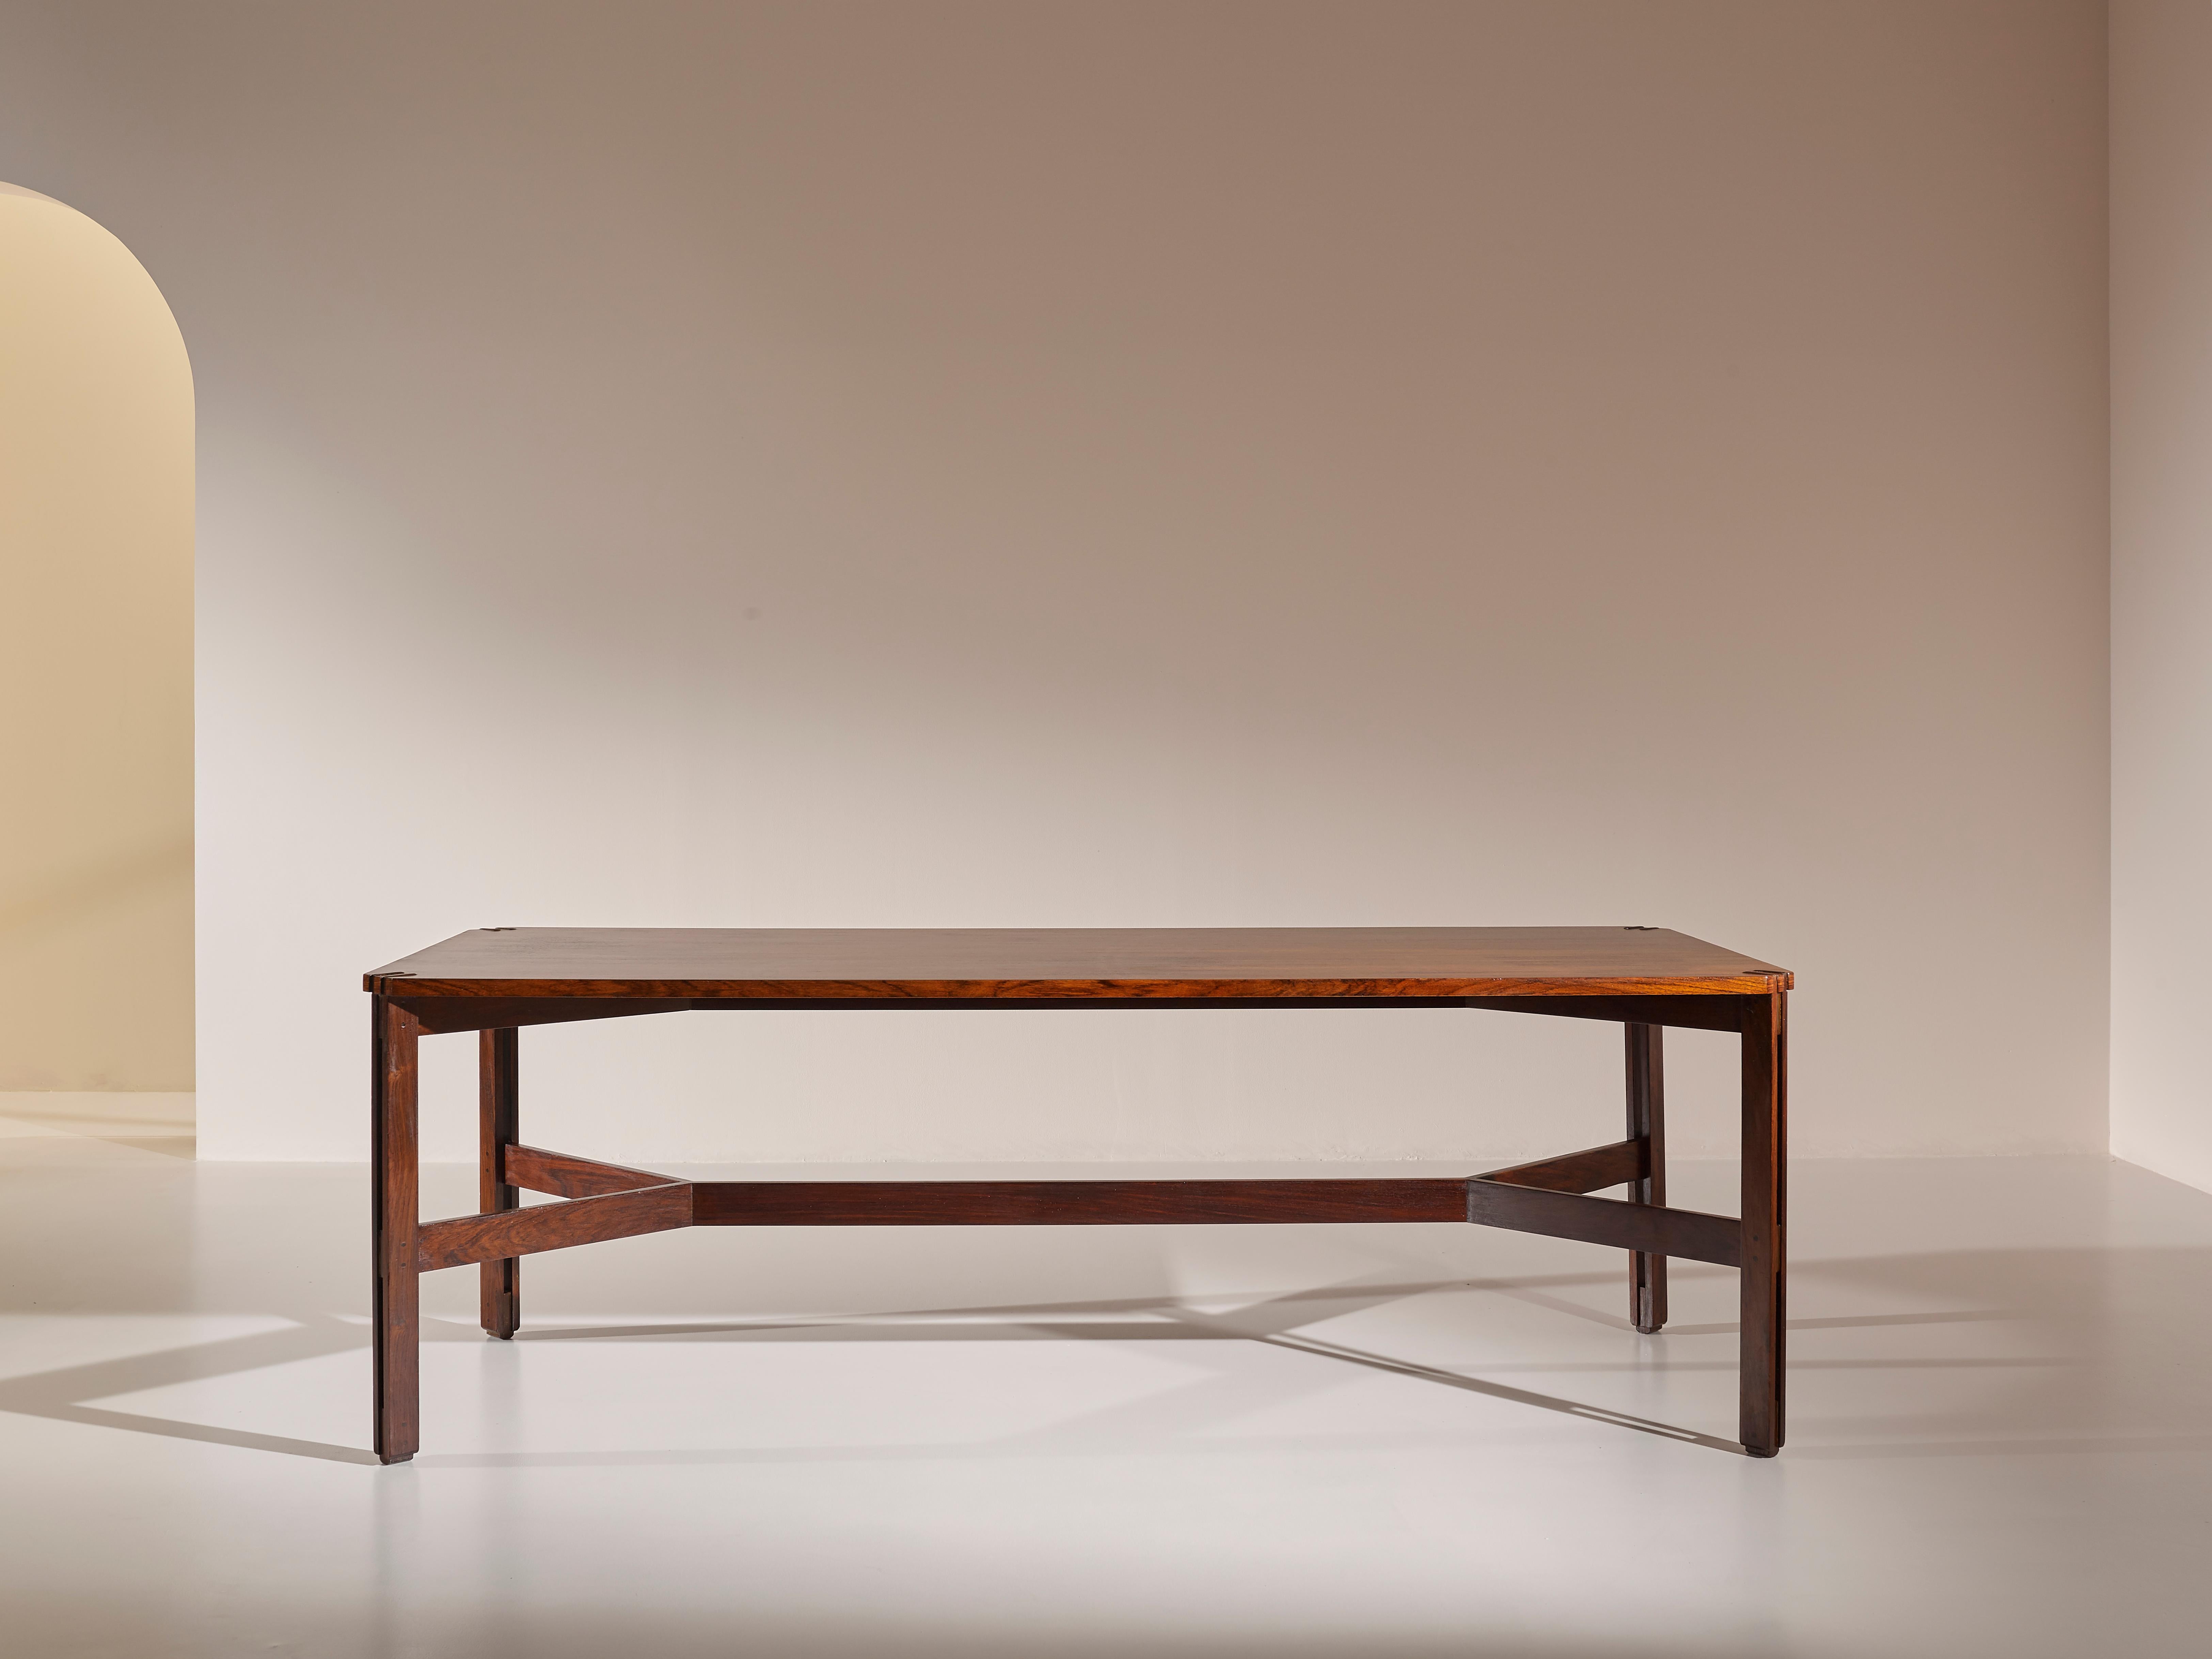 A rare dining table mod 574/2 designed by Ico Parisi in the 1959 and produced by Figli di Amedeo Cassina at the beginning of the 1960s. Made in rosewood it has a very clean design with four refined legs beautifully joined to the top of the table and